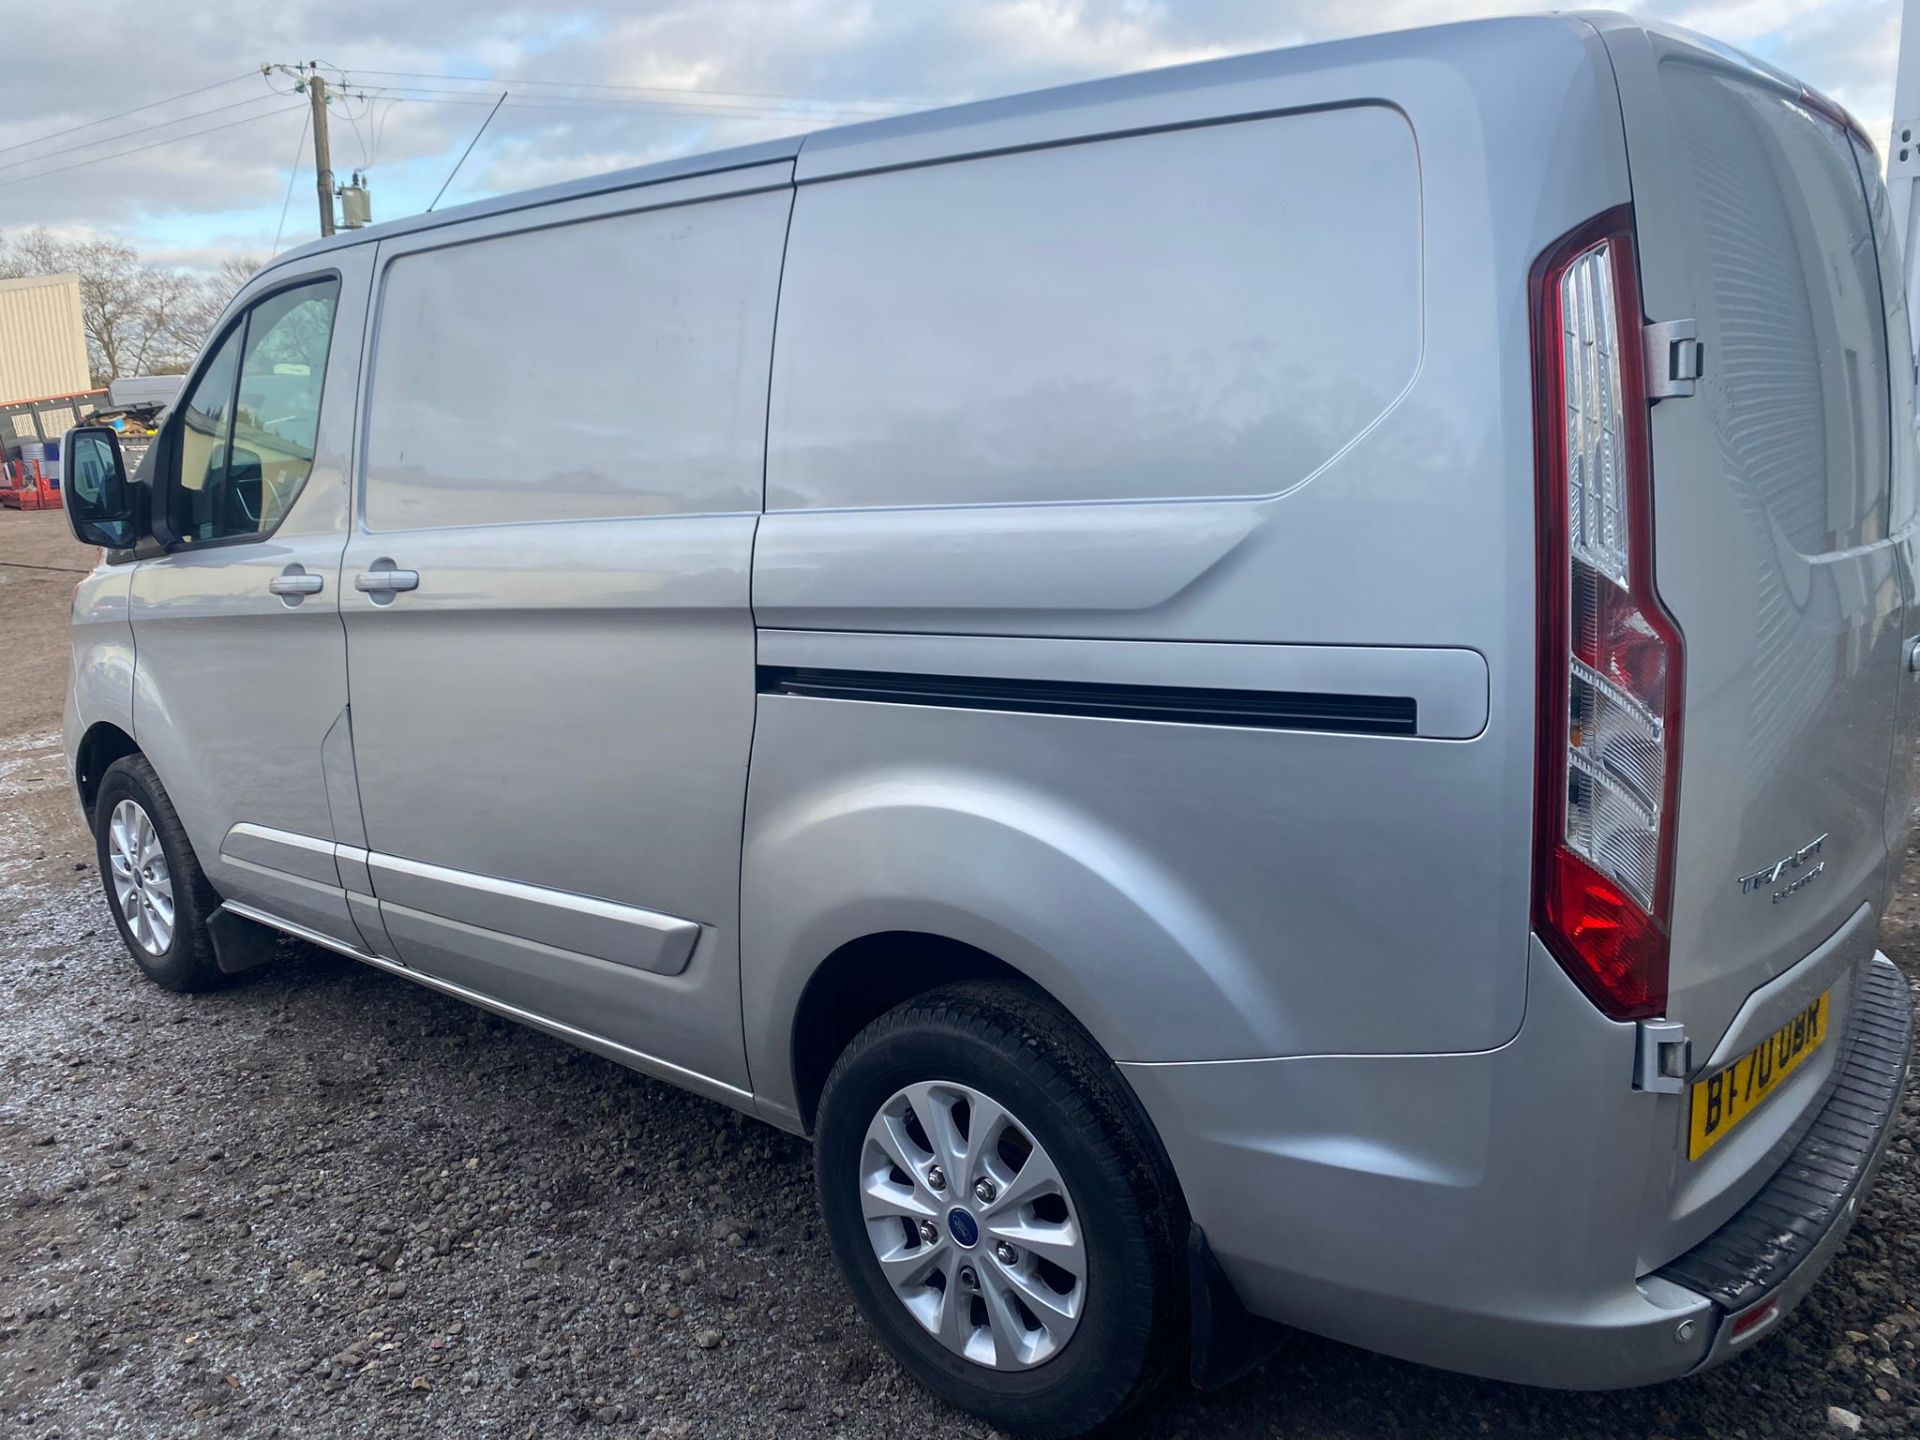 2020 70 FORD TRANSIT CUSTOM LIMITED PANEL VAN - 58K MILES - AIR CON - PLY LINED - ALLOY WHEELS - Image 4 of 6